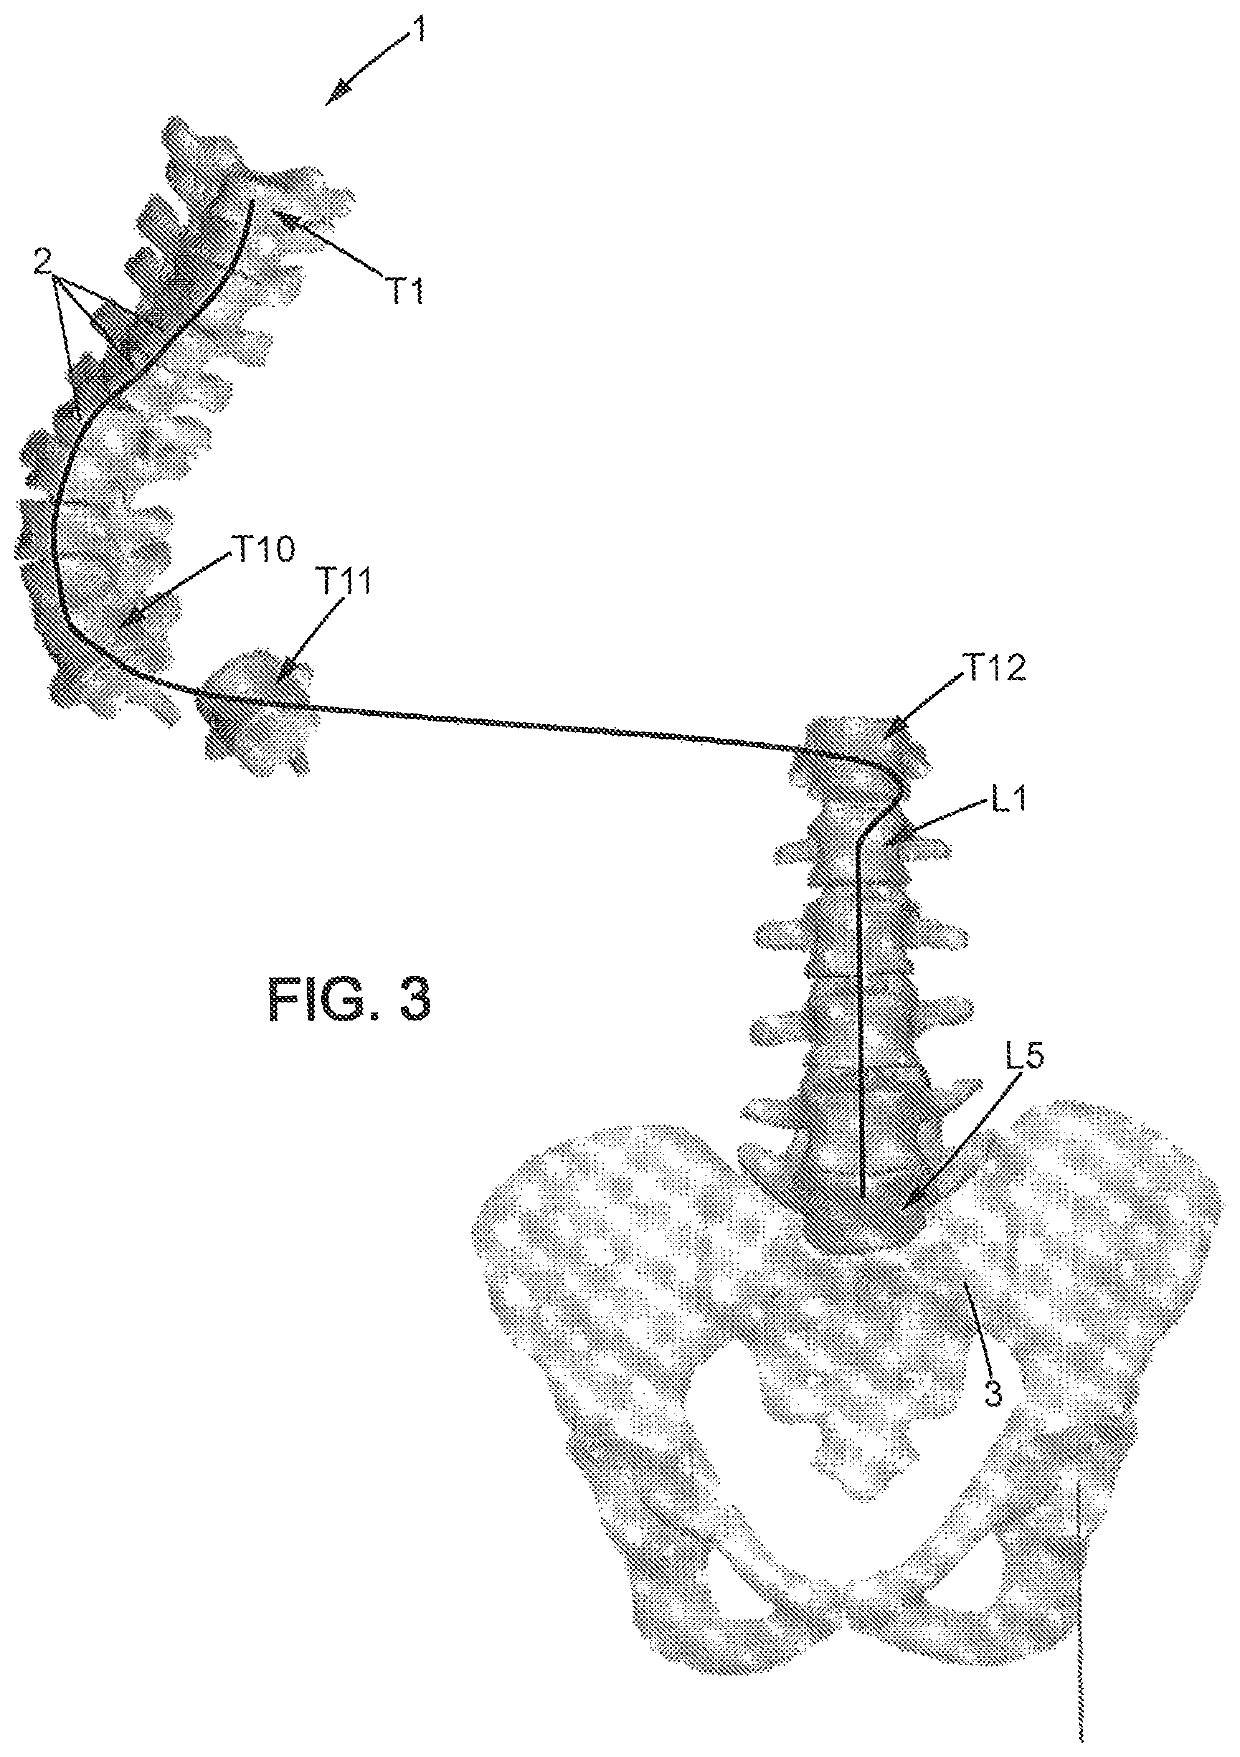 Method of preoperative planning to correct spine misalignment of a patient